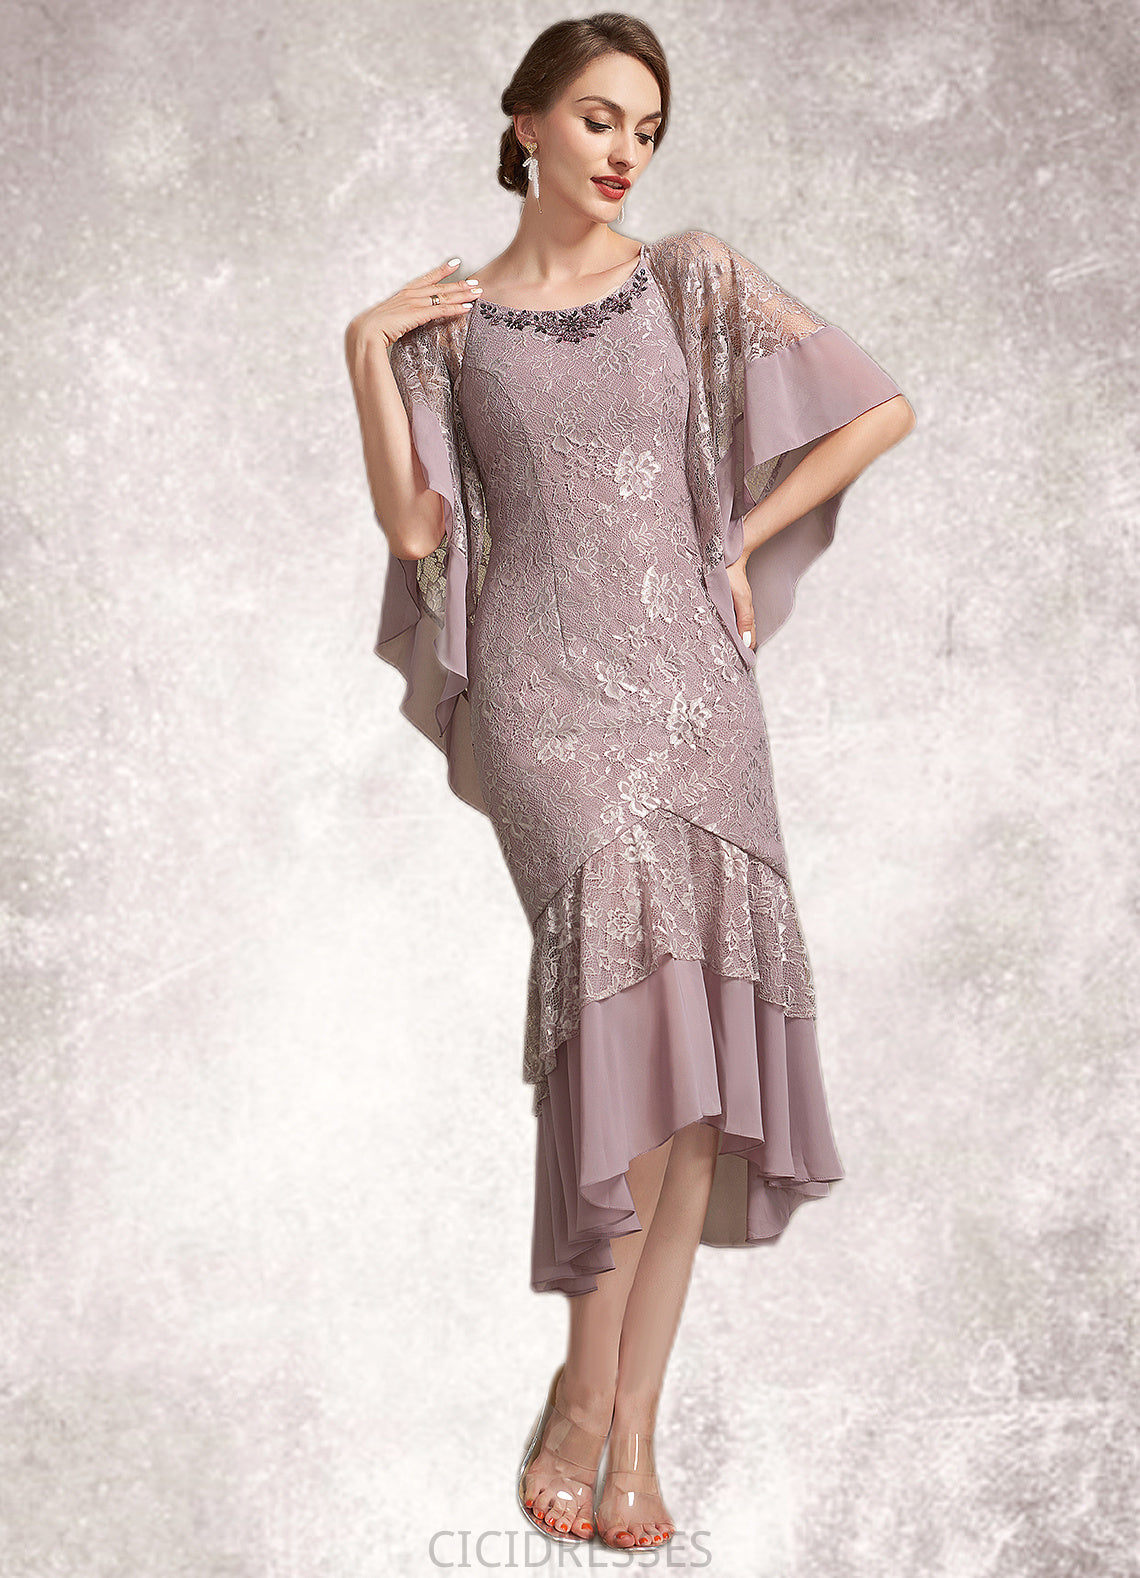 Miracle Trumpet/Mermaid Scoop Neck Asymmetrical Chiffon Lace Mother of the Bride Dress CIC8126P0014945